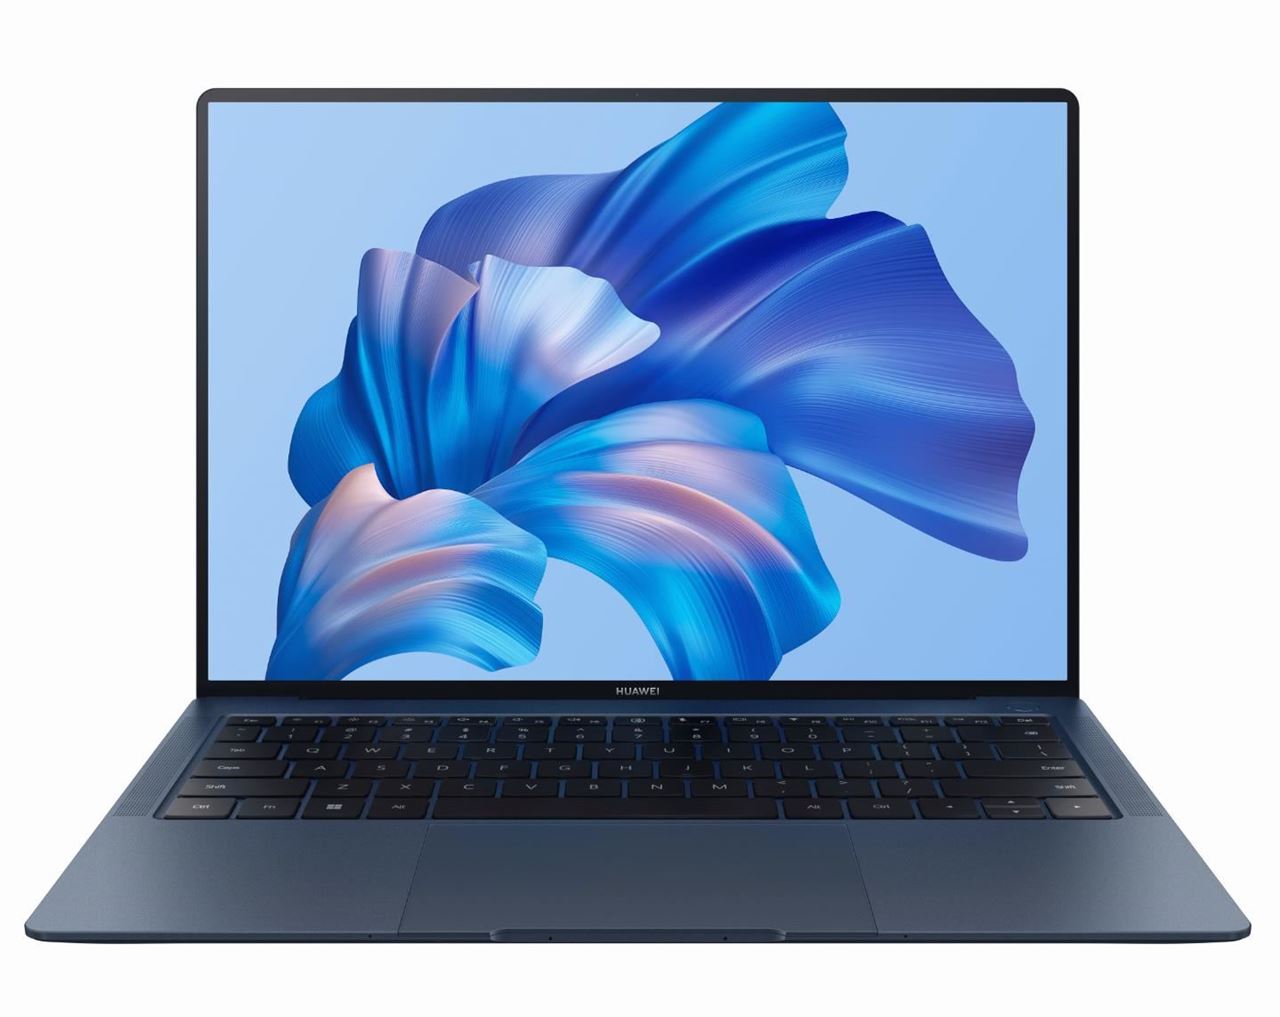 The new HUAWEI MateBook X Pro is the Ultimate elegant high-performance flagship laptop, and here are three reasons that prove it!